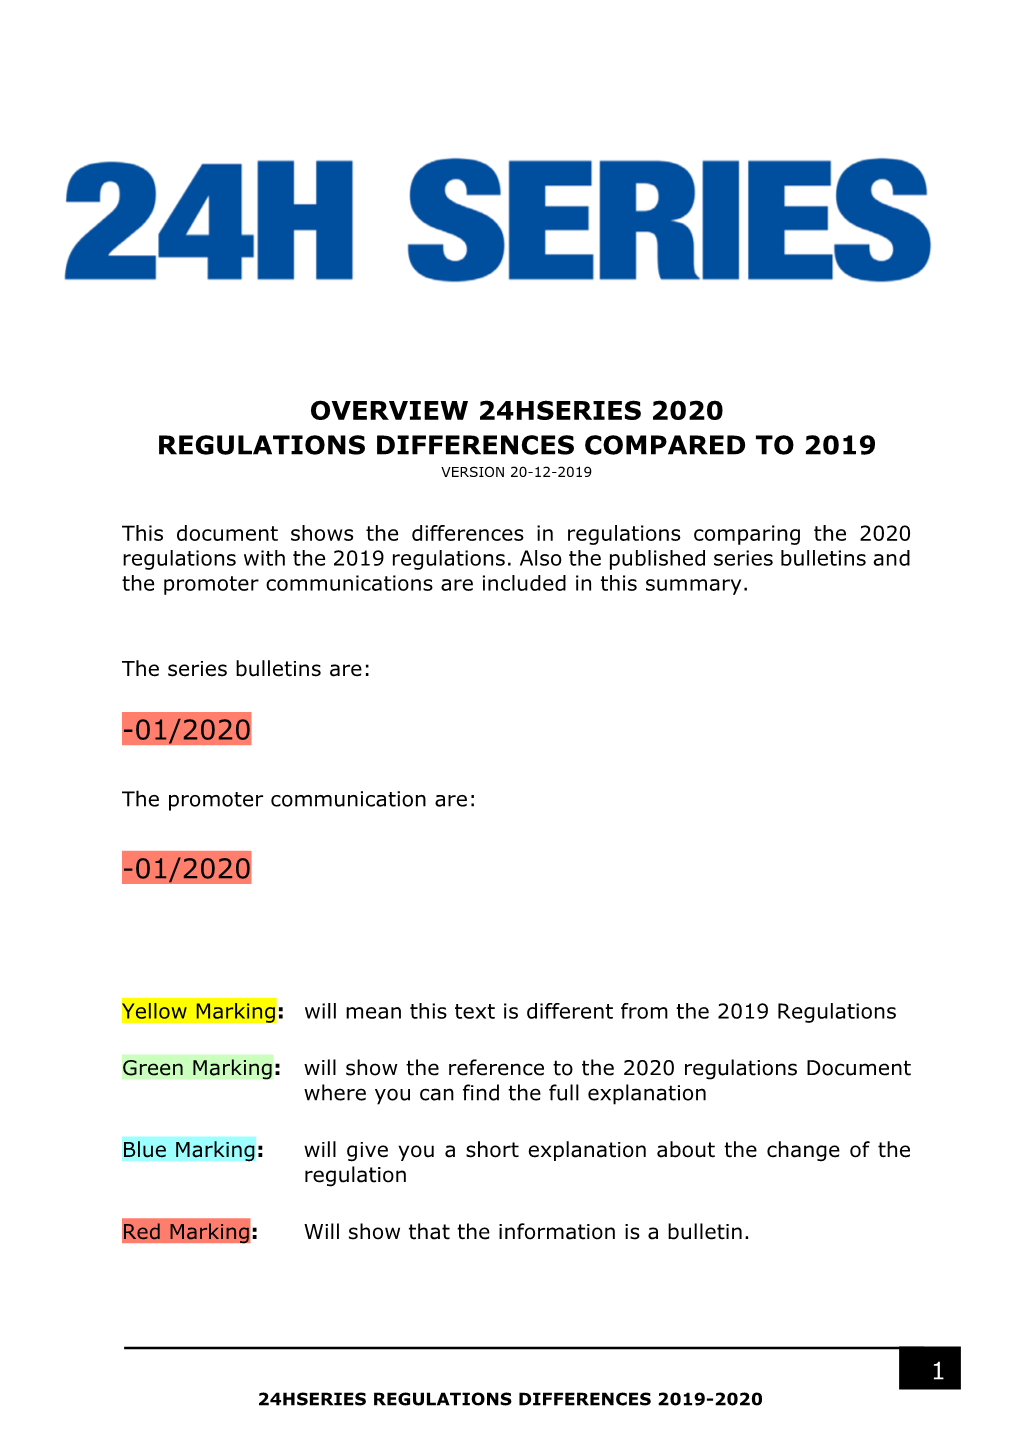 Overview 24Hseries 2020 Regulations Differences Compared to 2019 Version 20-12-2019